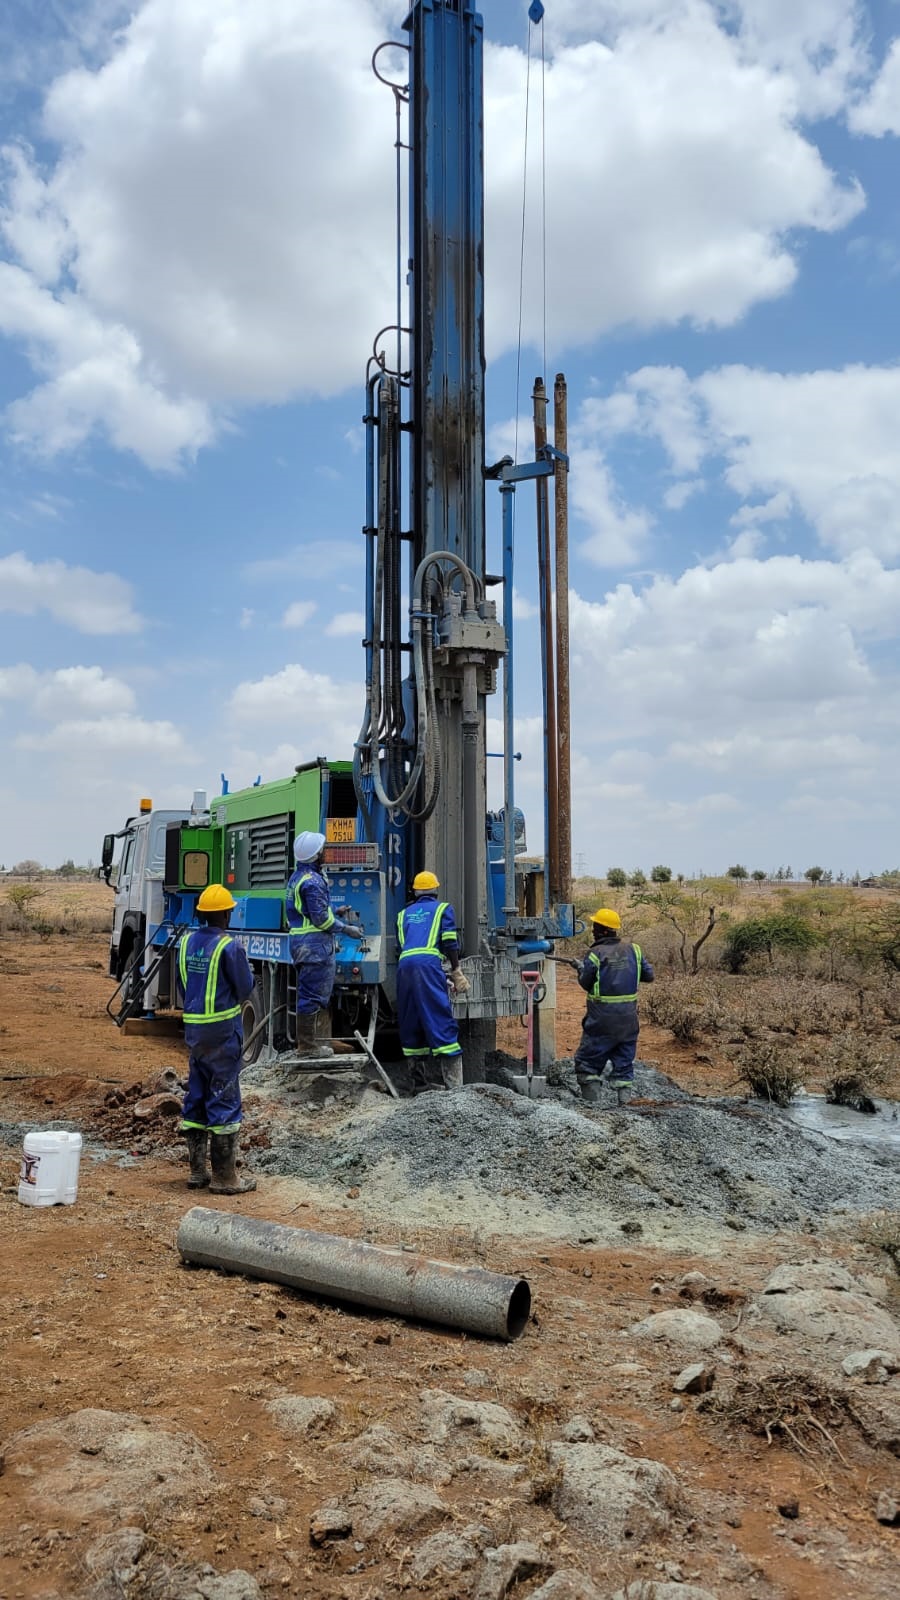 Drilling of Boreholes, water-well for home and industrial use.